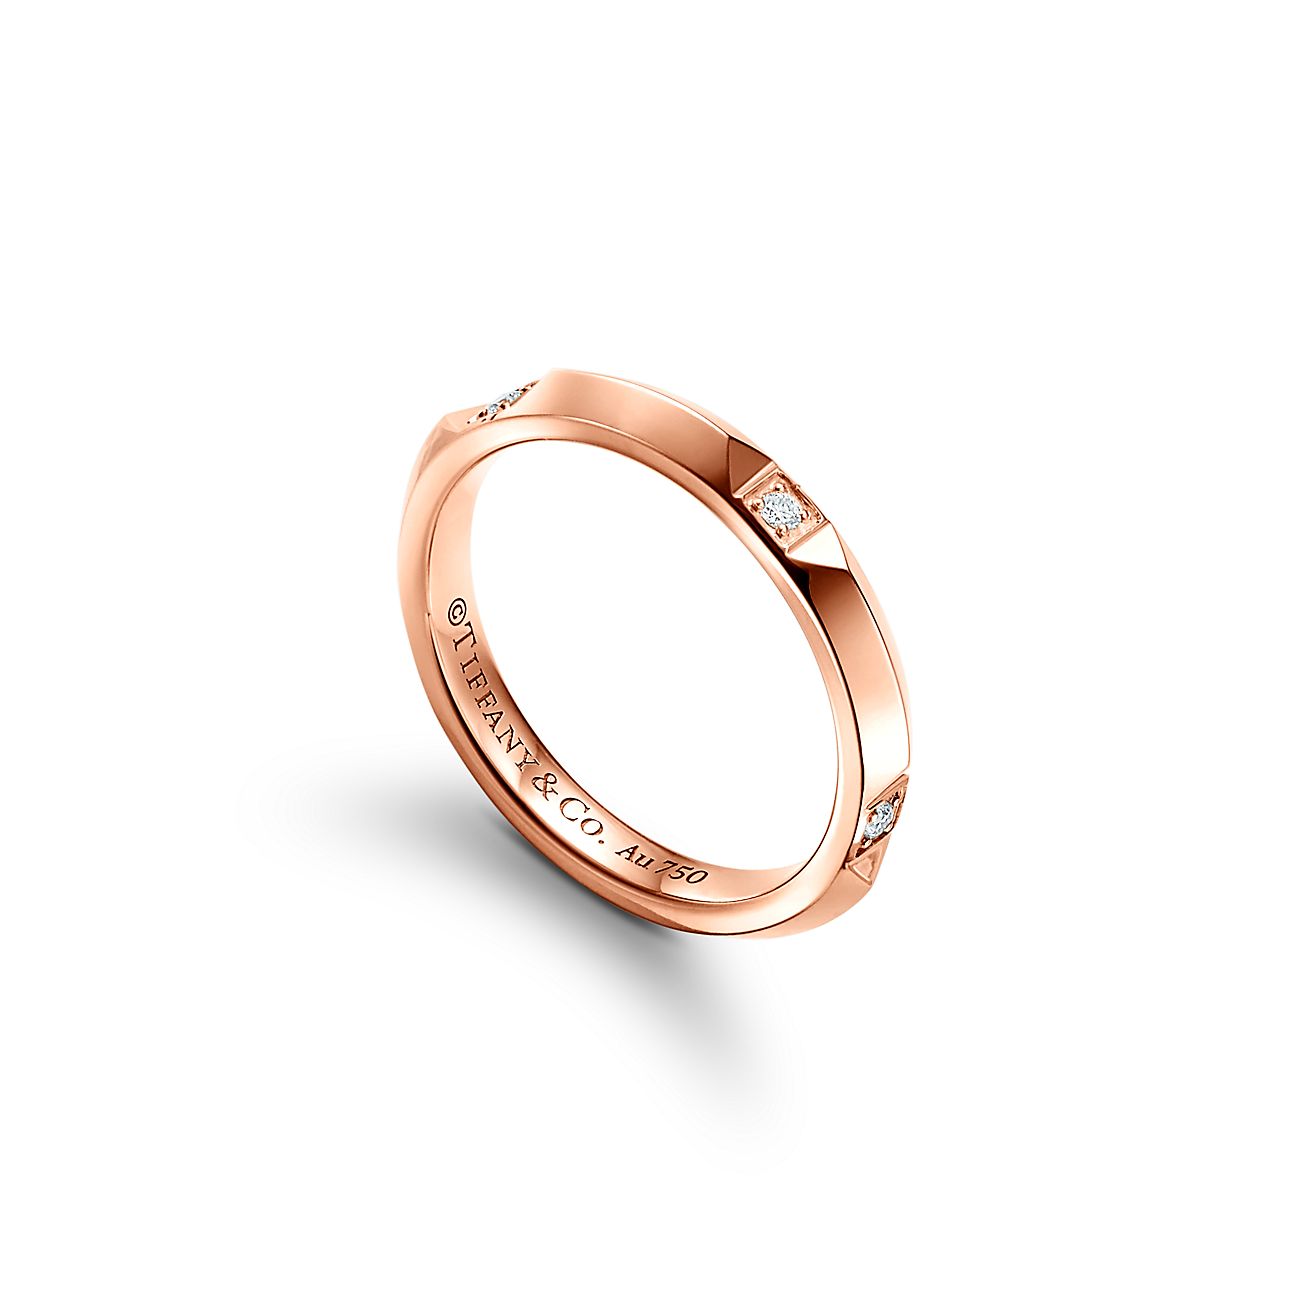 Tiffany True band ring in 18k rose gold with diamonds, 2.5 mm wide